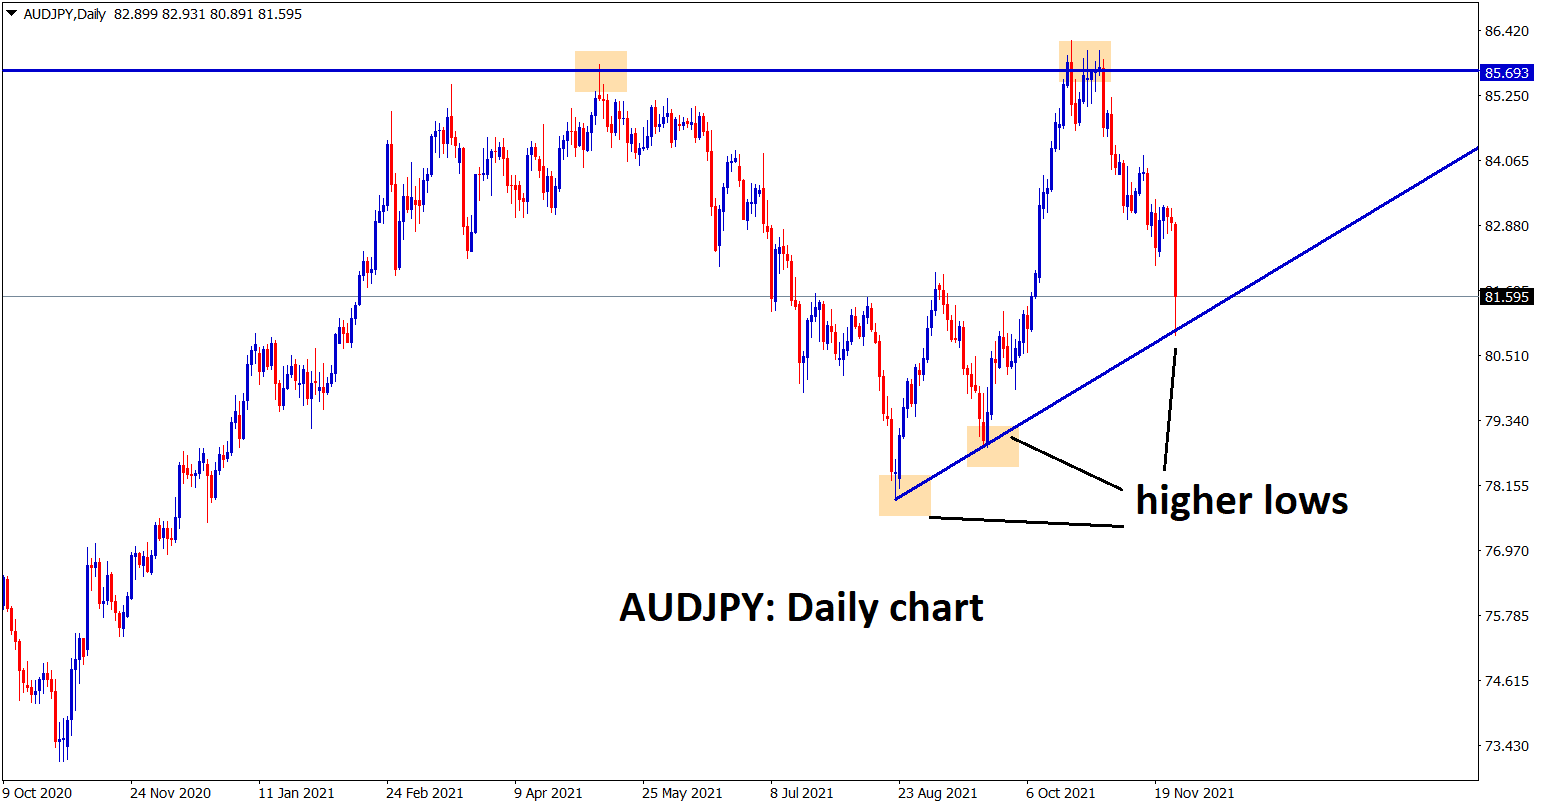 AUDJPY has reached the higher low in the daily timeframe chart